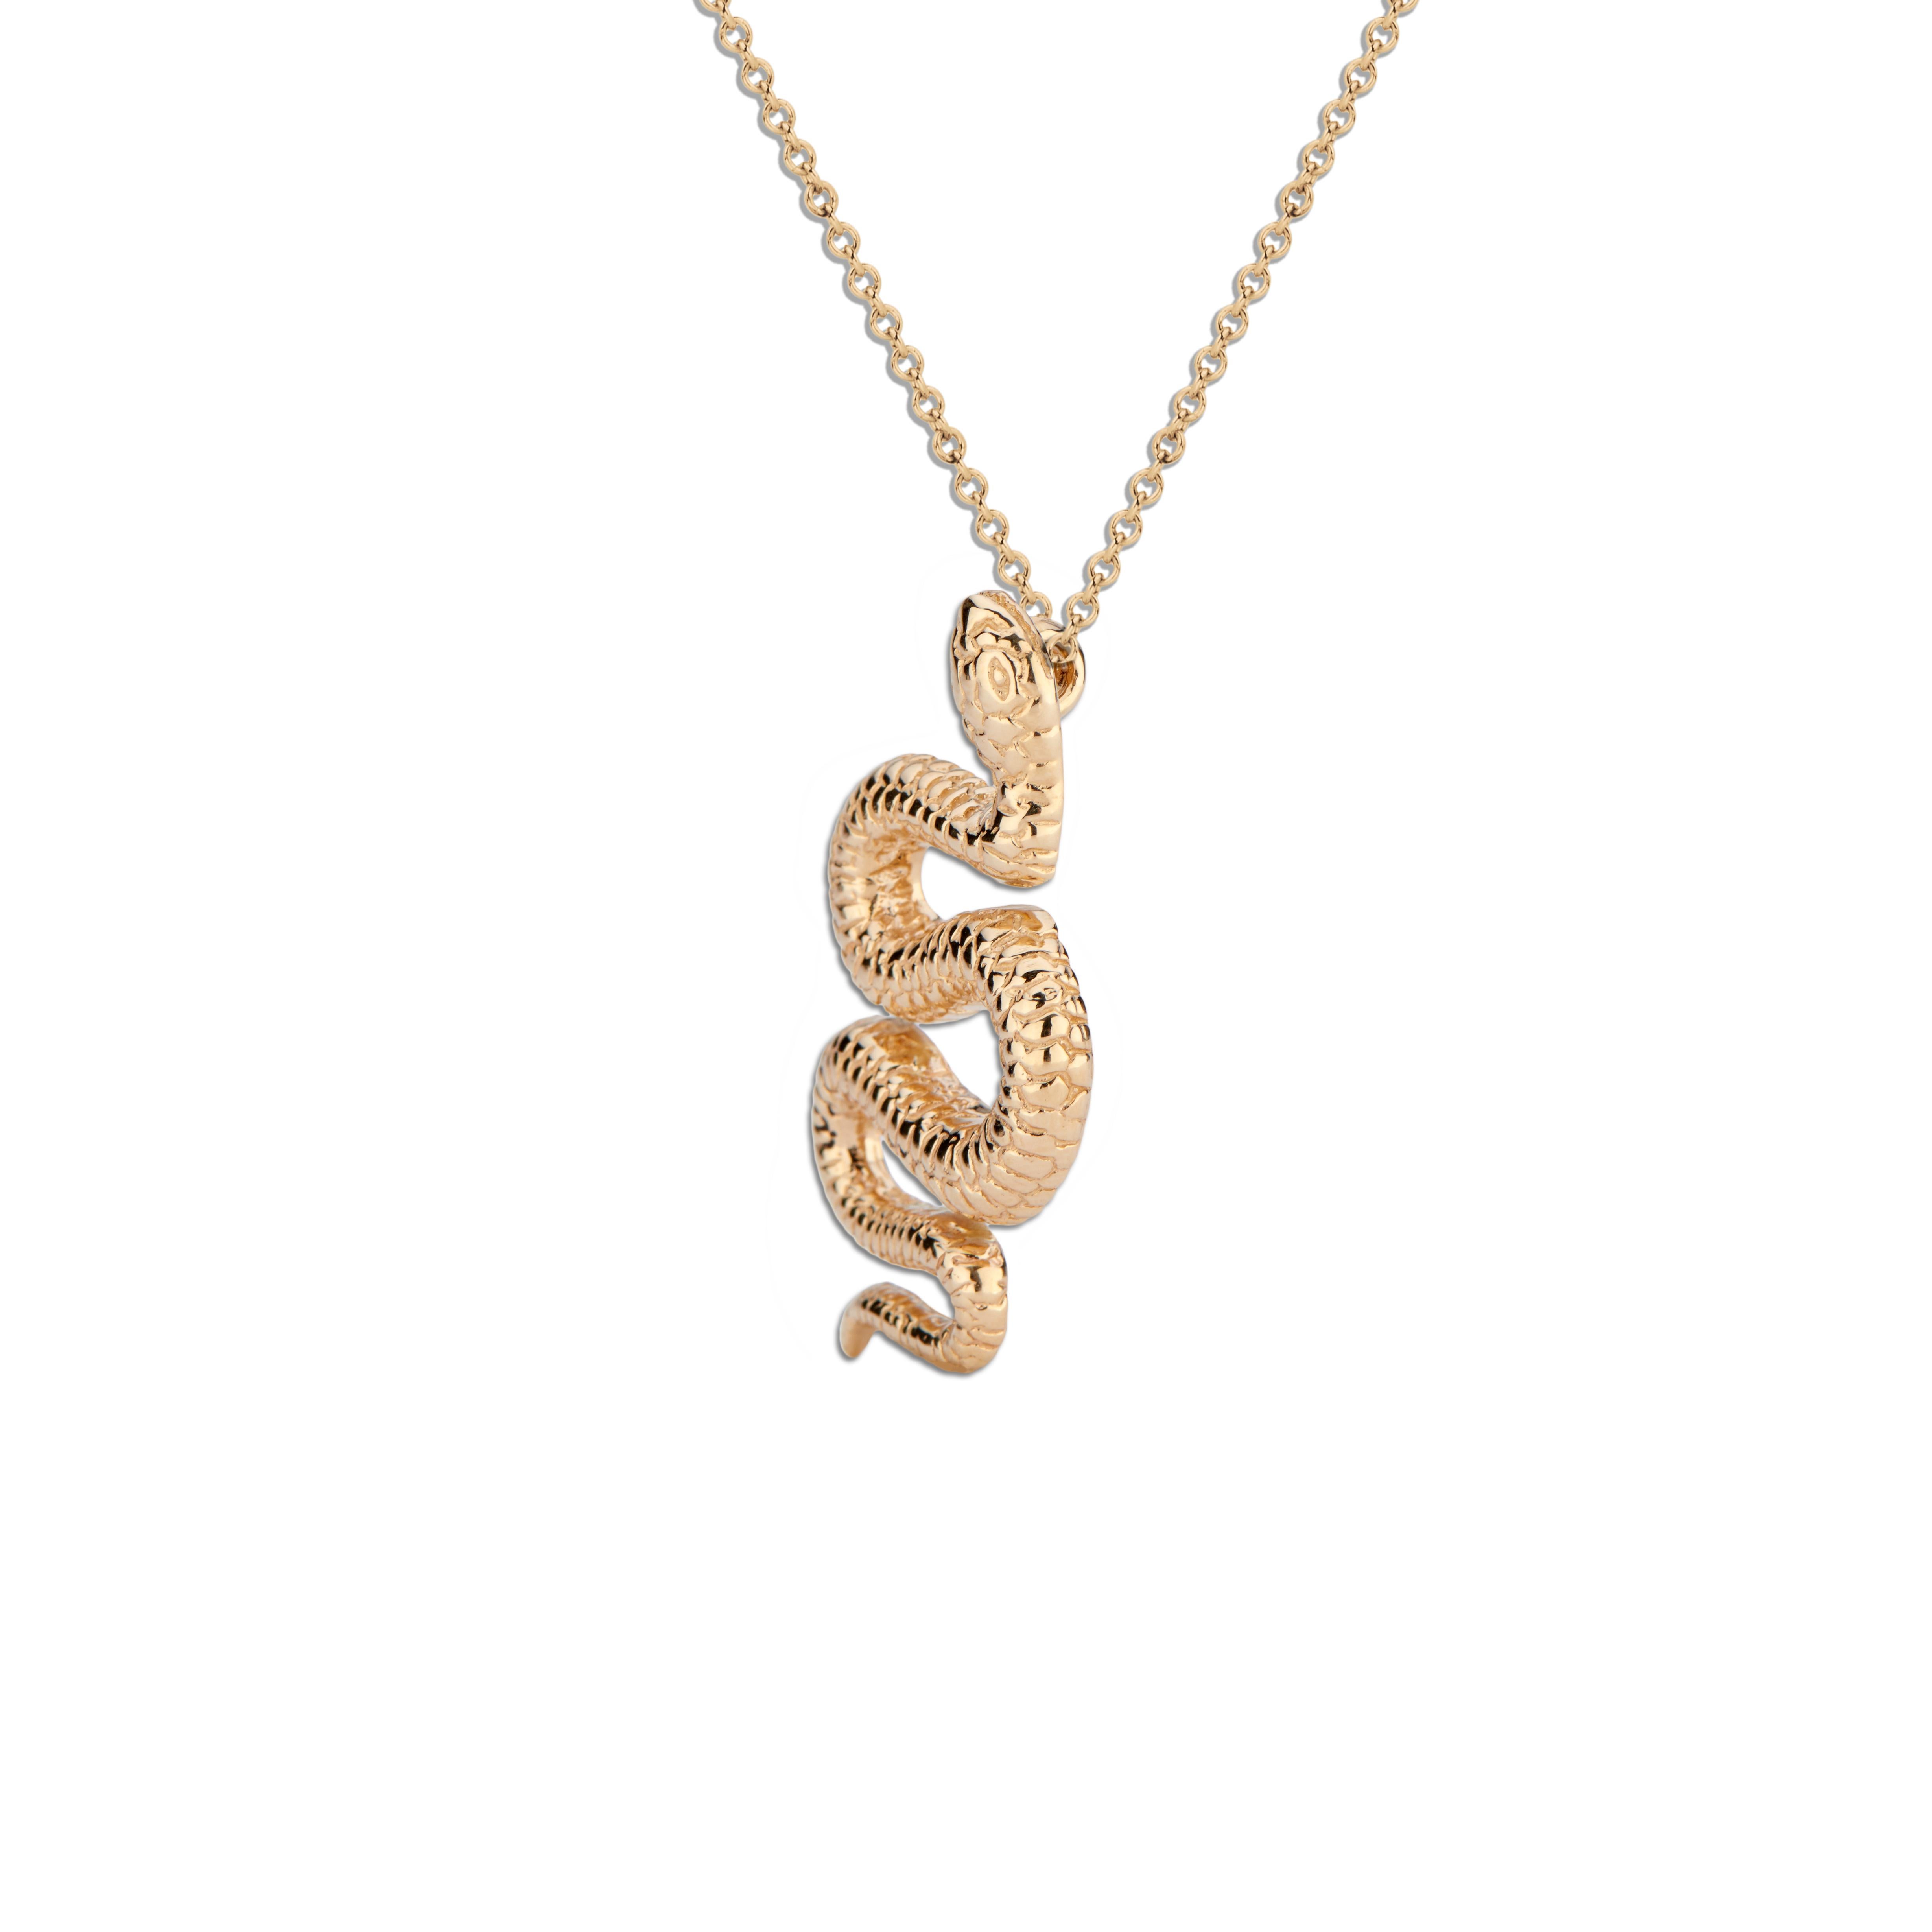 This 14k gold Snake Pendant is a substantial piece that was designed to pay reverence to the beauty and wonder of snakes.  It represents transformation and renewal.  Just as a snake sheds its skin, we must continually shed ours in order not only to